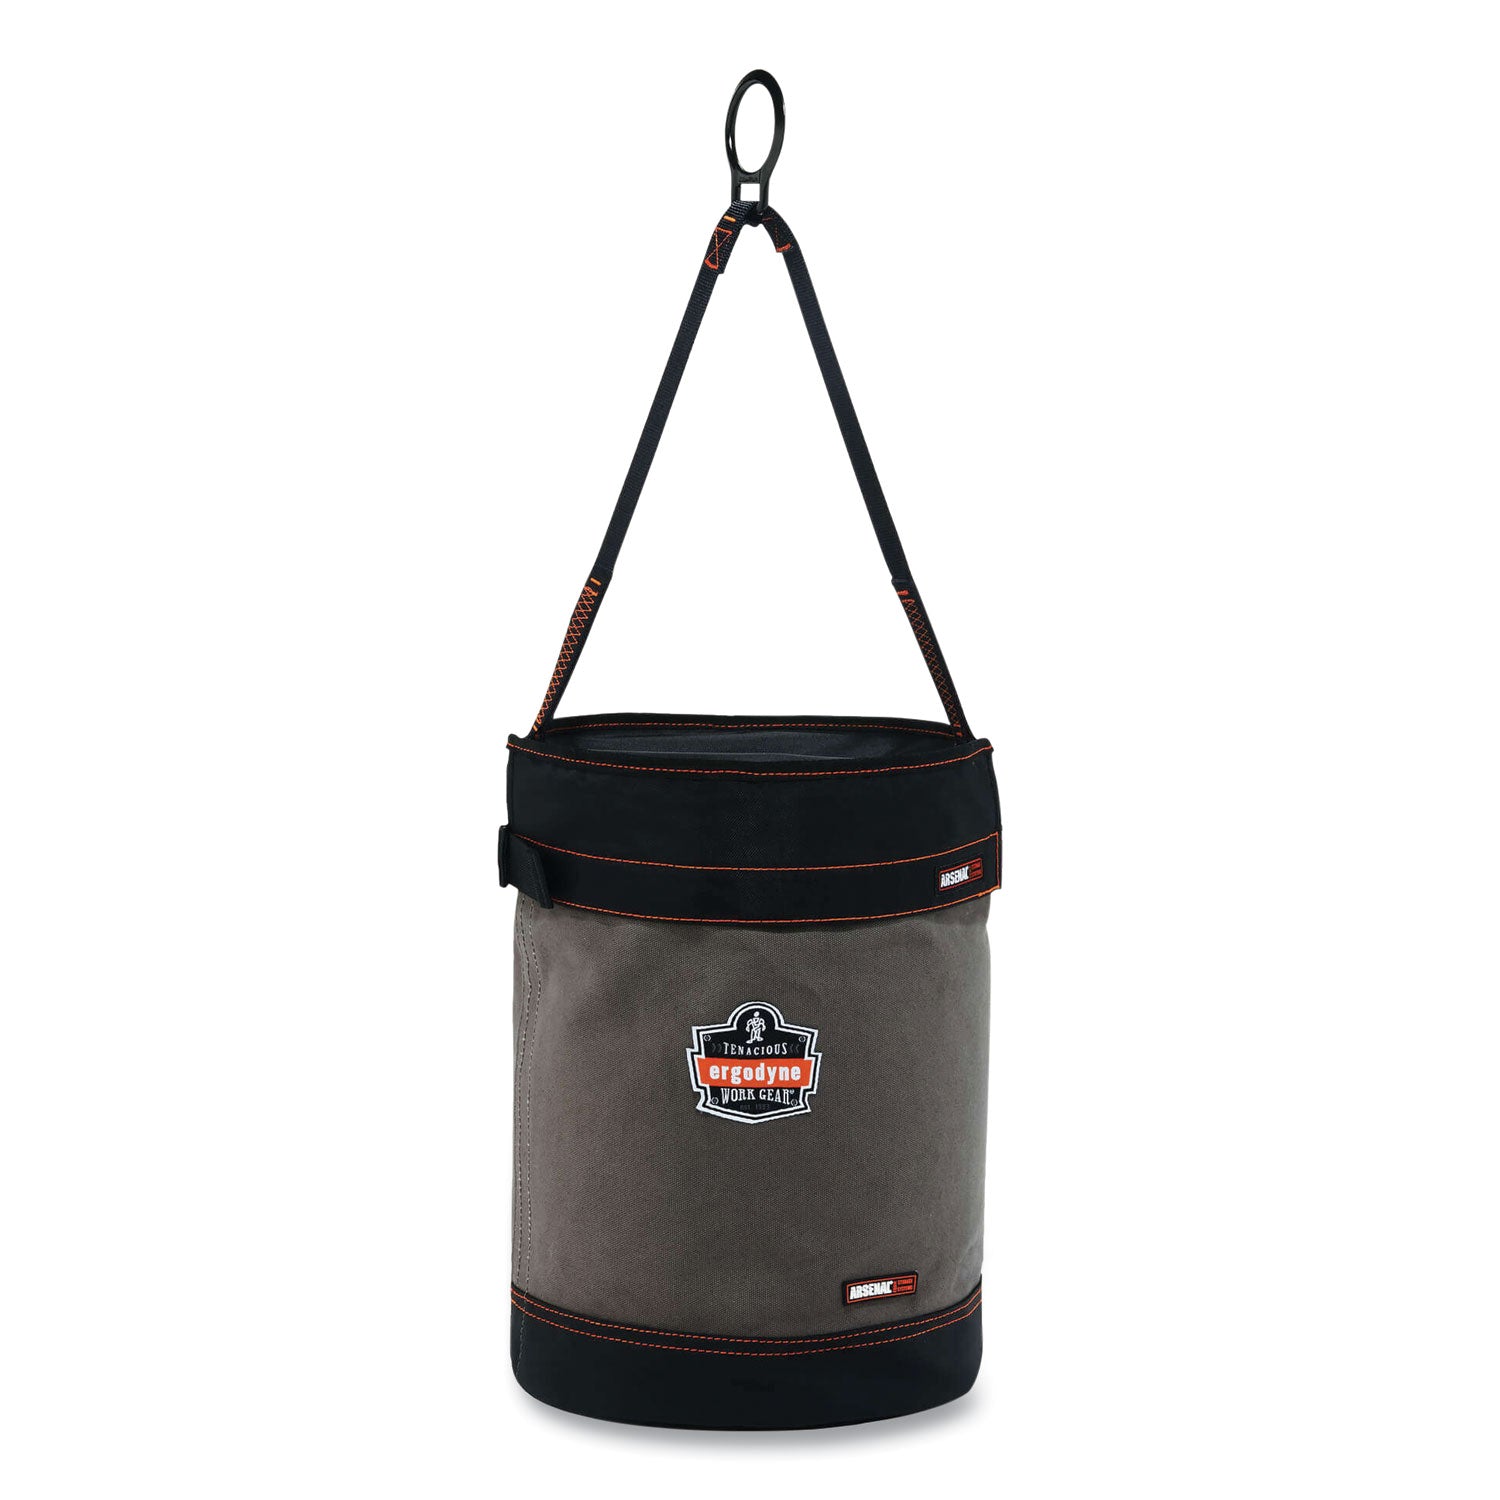 arsenal-5960t-canvas-hoist-bucket-and-top-with-d-rings-125-x-125-x-17-gray-ships-in-1-3-business-days_ego14860 - 1